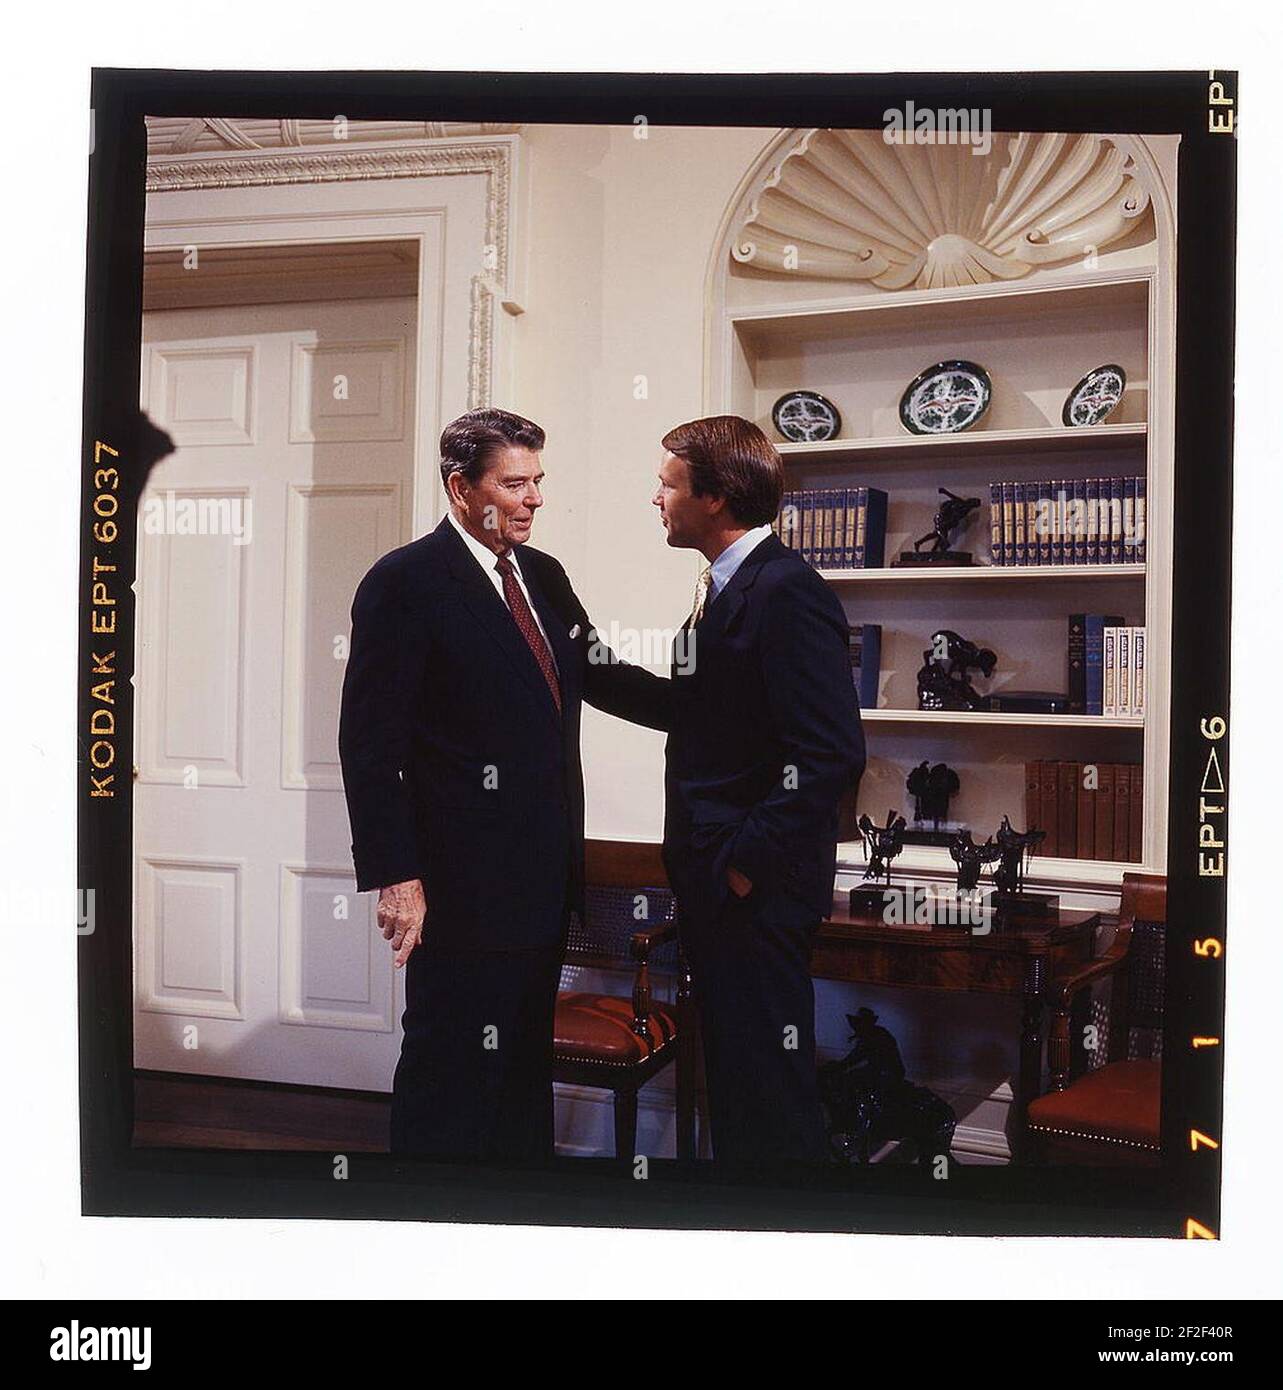 President Ronald Reagan, in the Oval Office, shaking hands with Republican senator Don Nickles of Oklahoma. Stock Photo